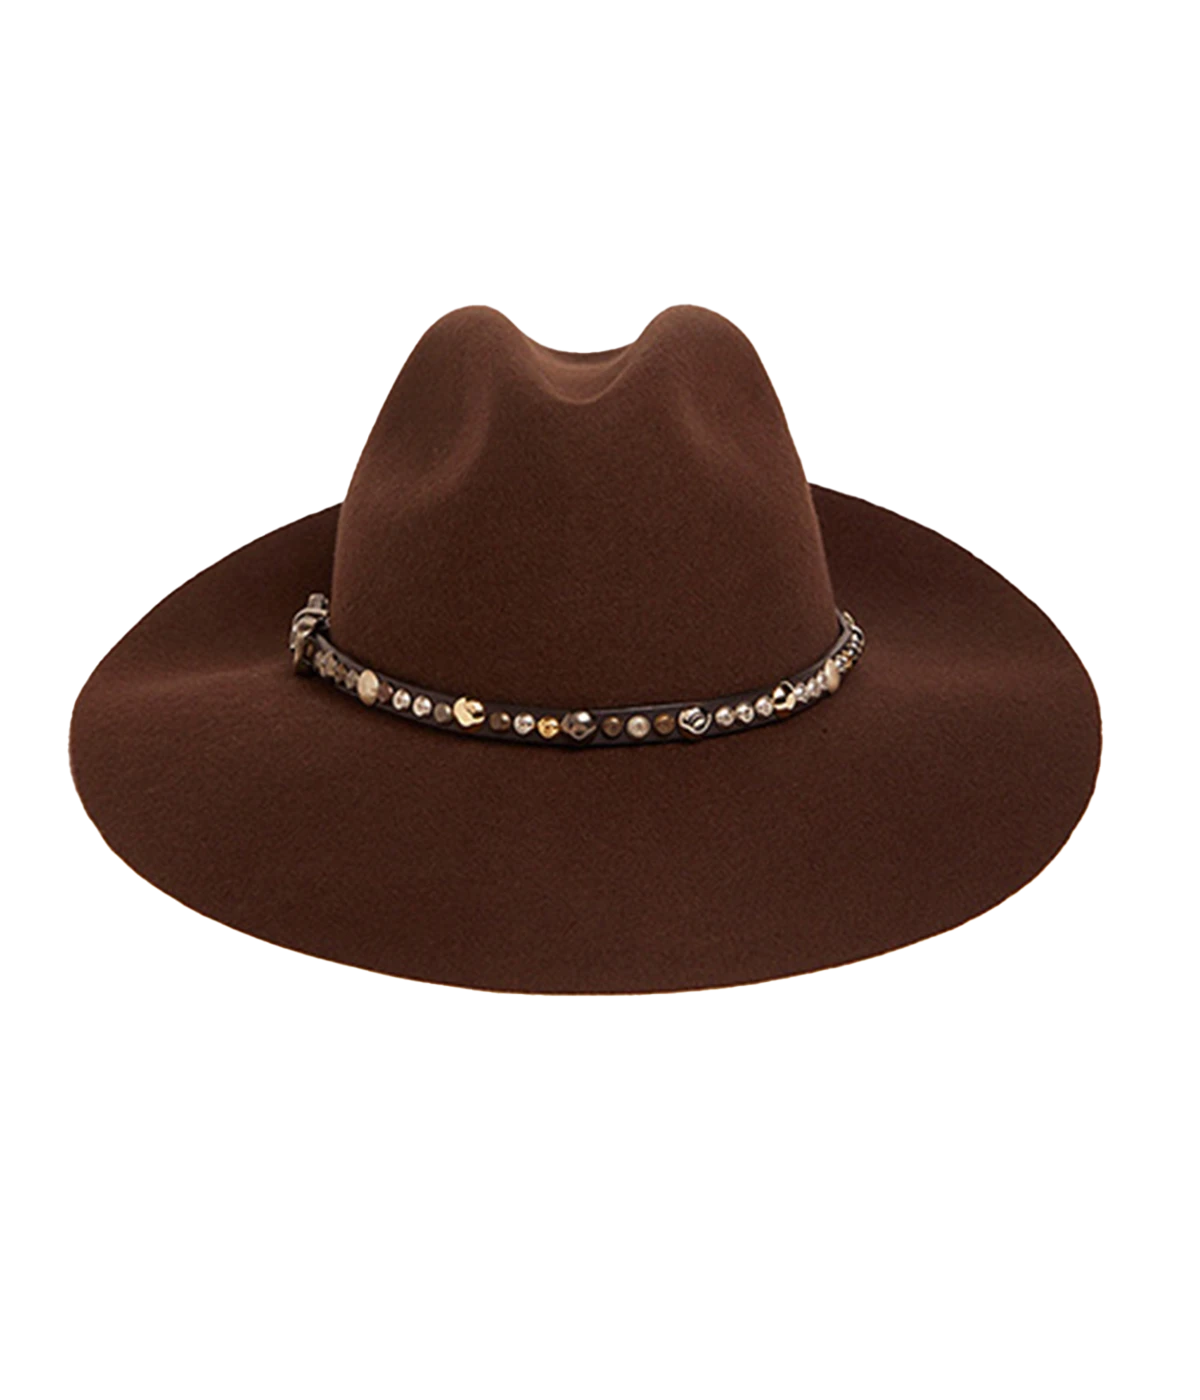 Golden Fedora Felt Hat with Studded Leather in Chicory Coffee